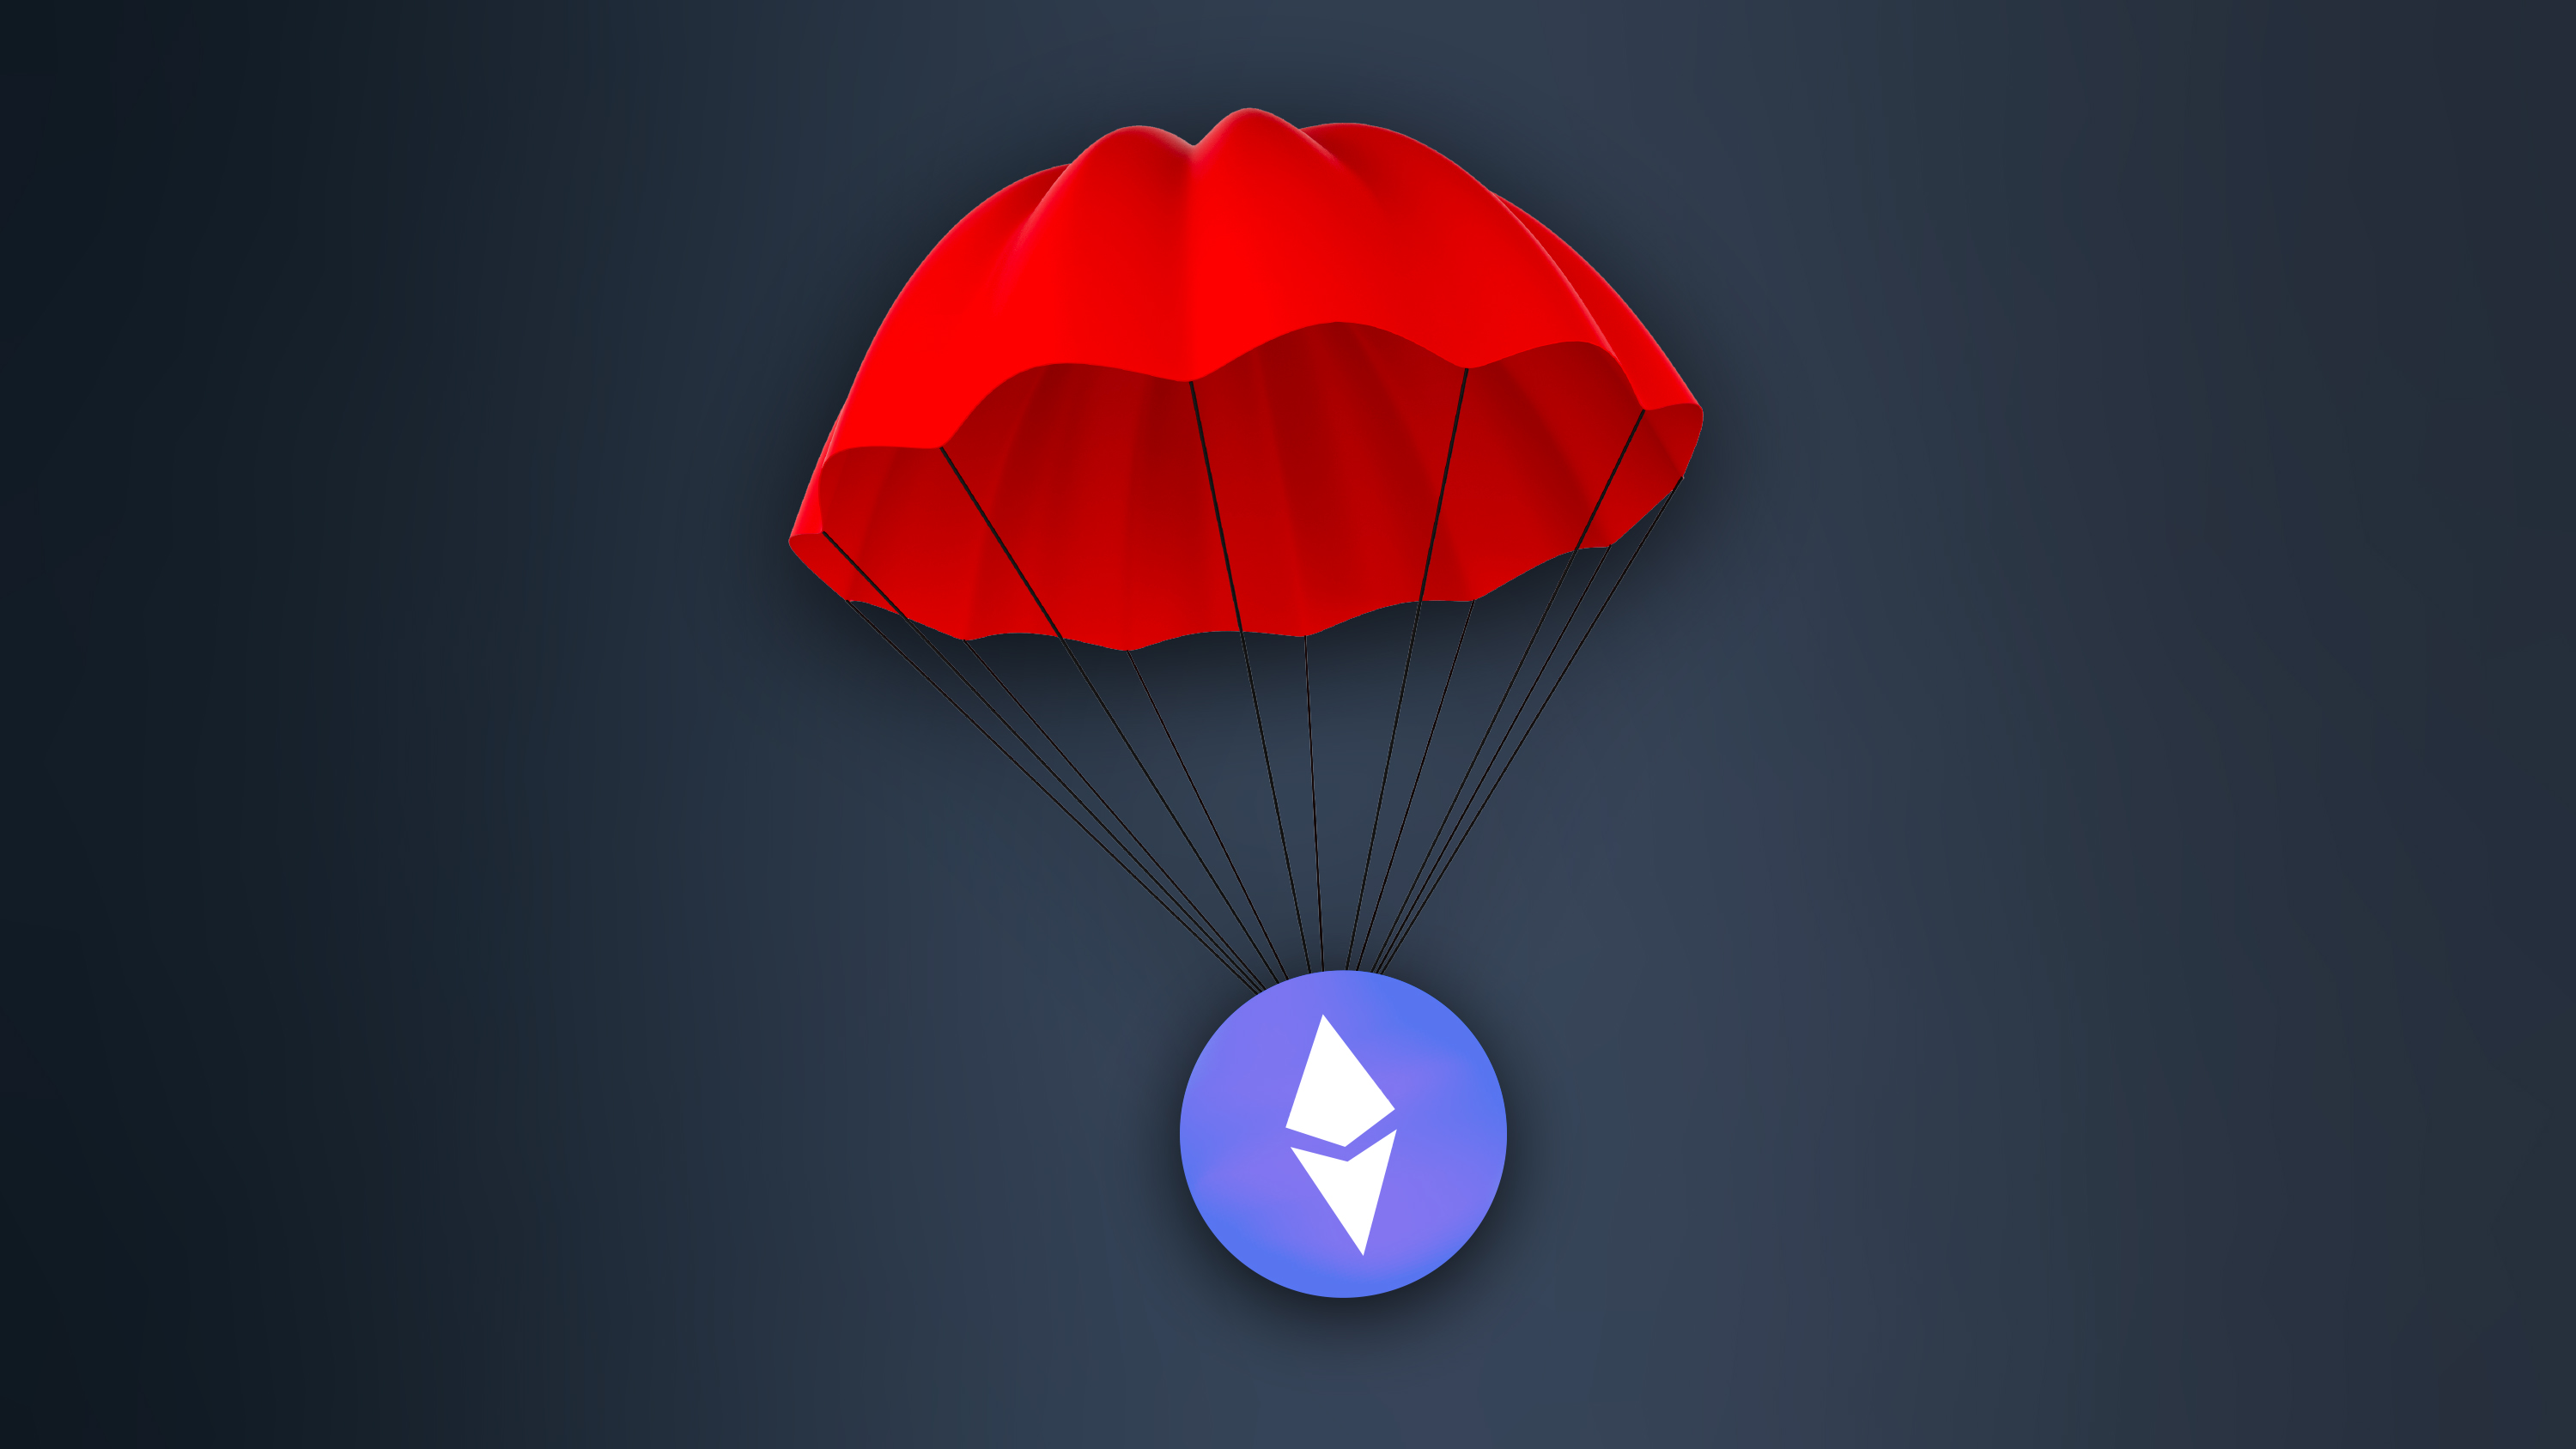 ethereum cryptocurrency icon dangling from red parachute